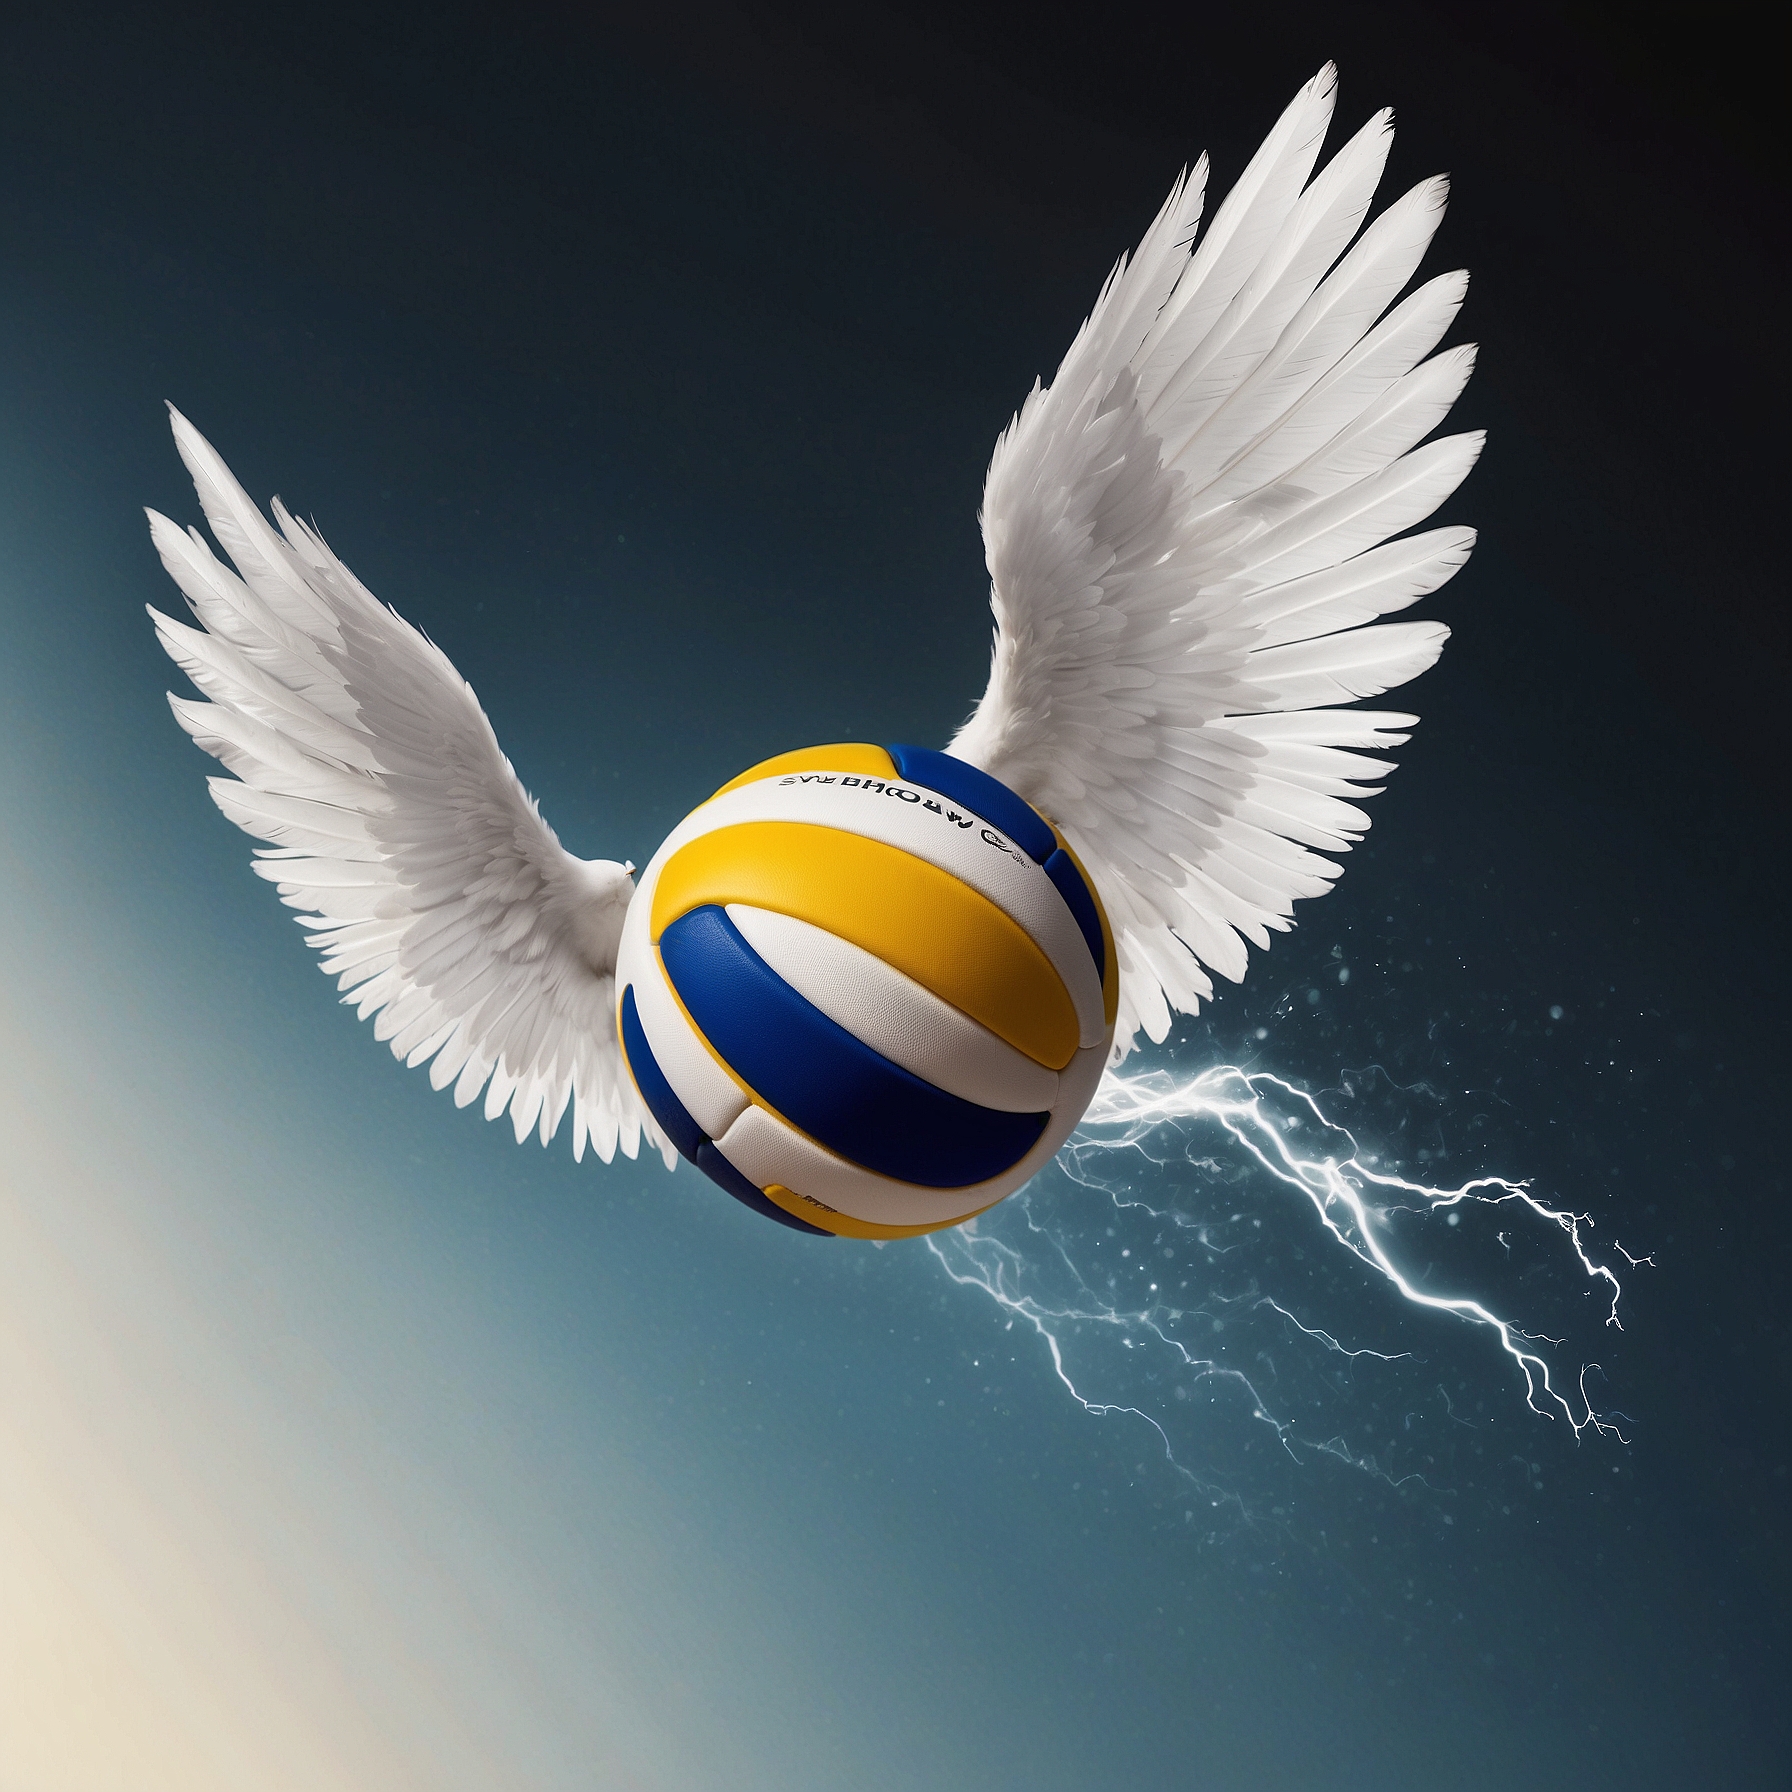 Default_a_flying_voleyball_with_white_wings_0 (1).jpg